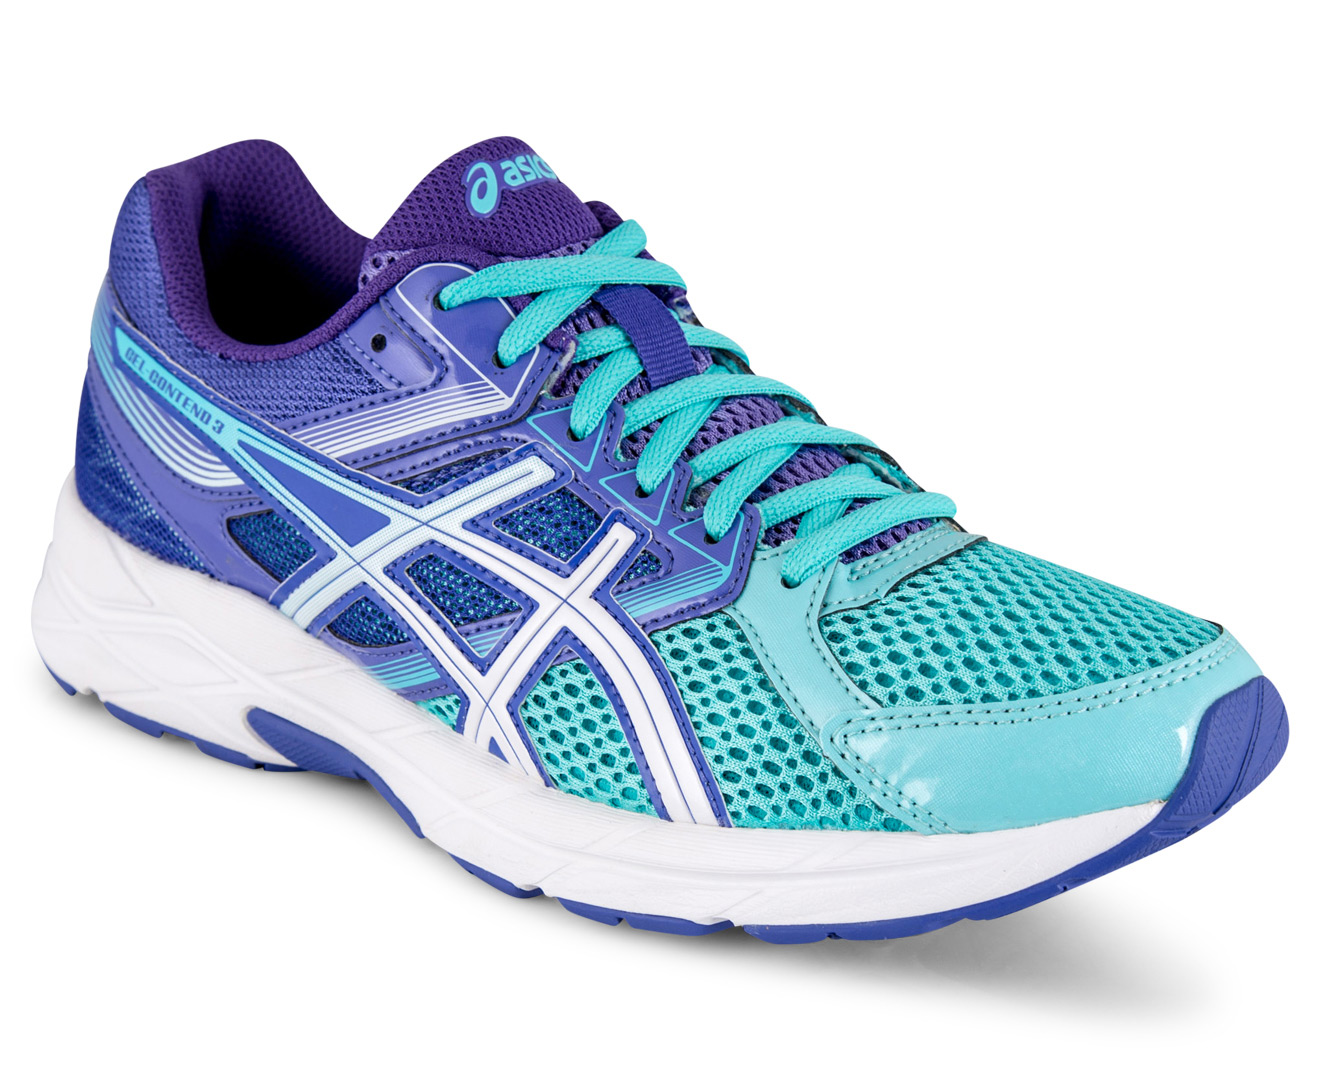 ASICS Women's GEL-Contend 3 Shoe - Turquoise/White/Acai | Great daily ...